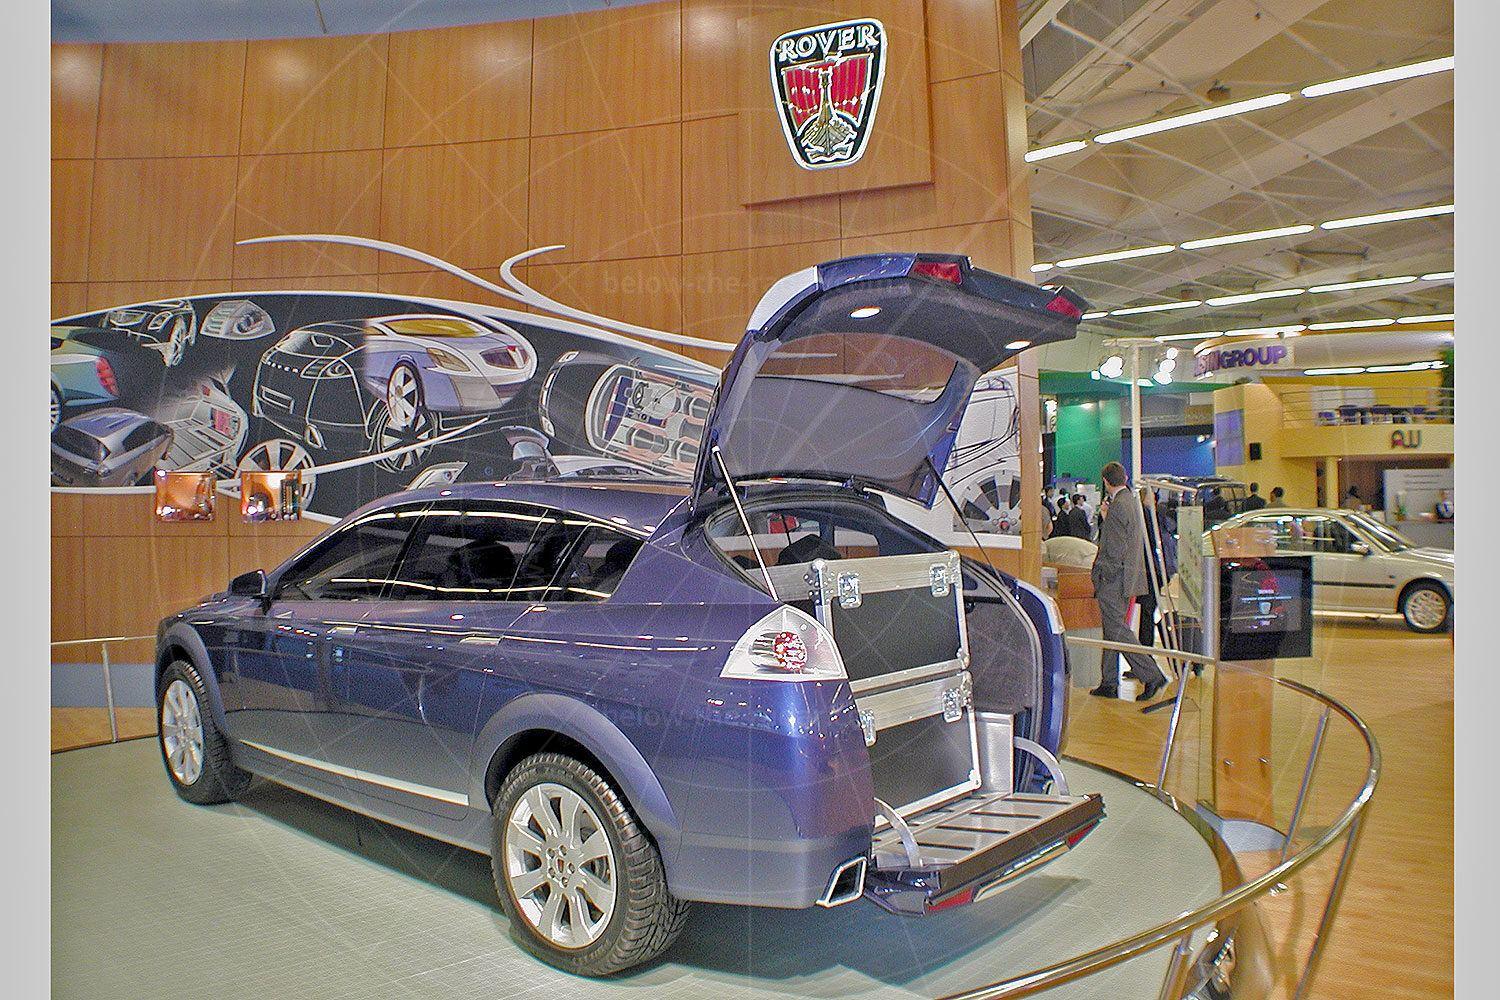 Rover TCV at the 2002 Paris motor show Pic: magiccarpics.co.uk | Rover TCV at the 2002 Paris motor show